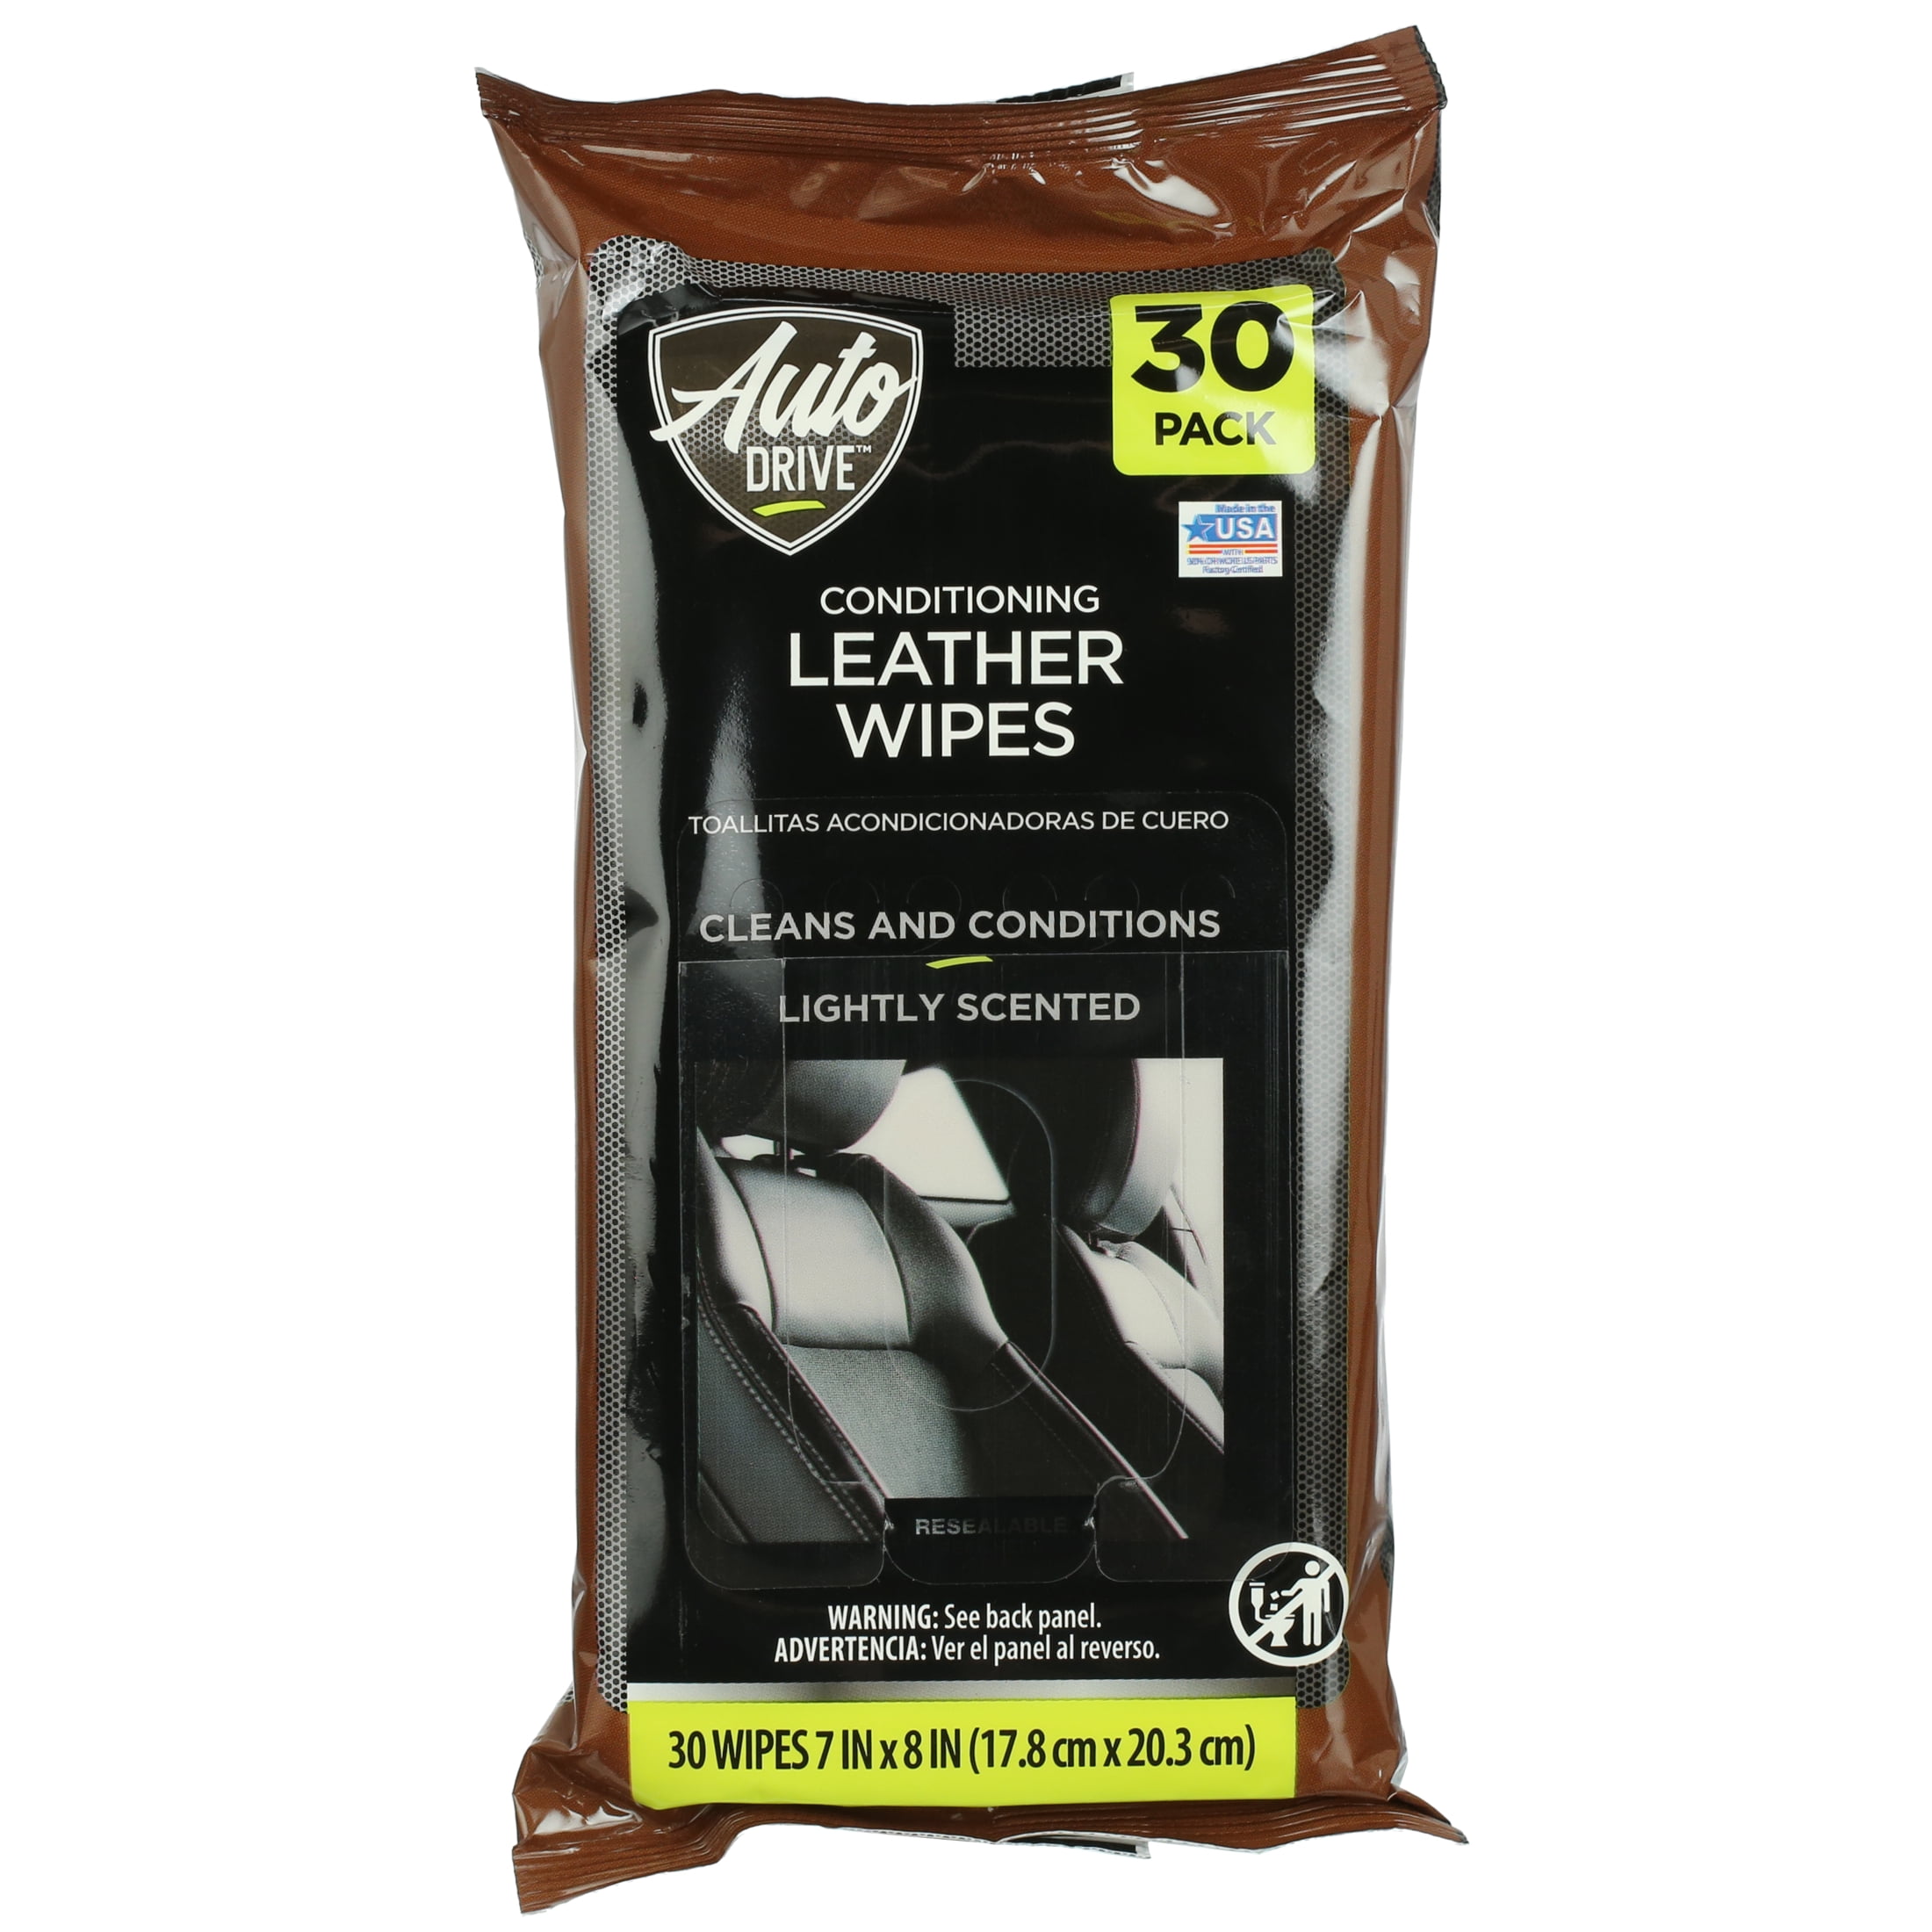 Auto Drive Conditioning Leather Wipes Soft Pack - 30 ct